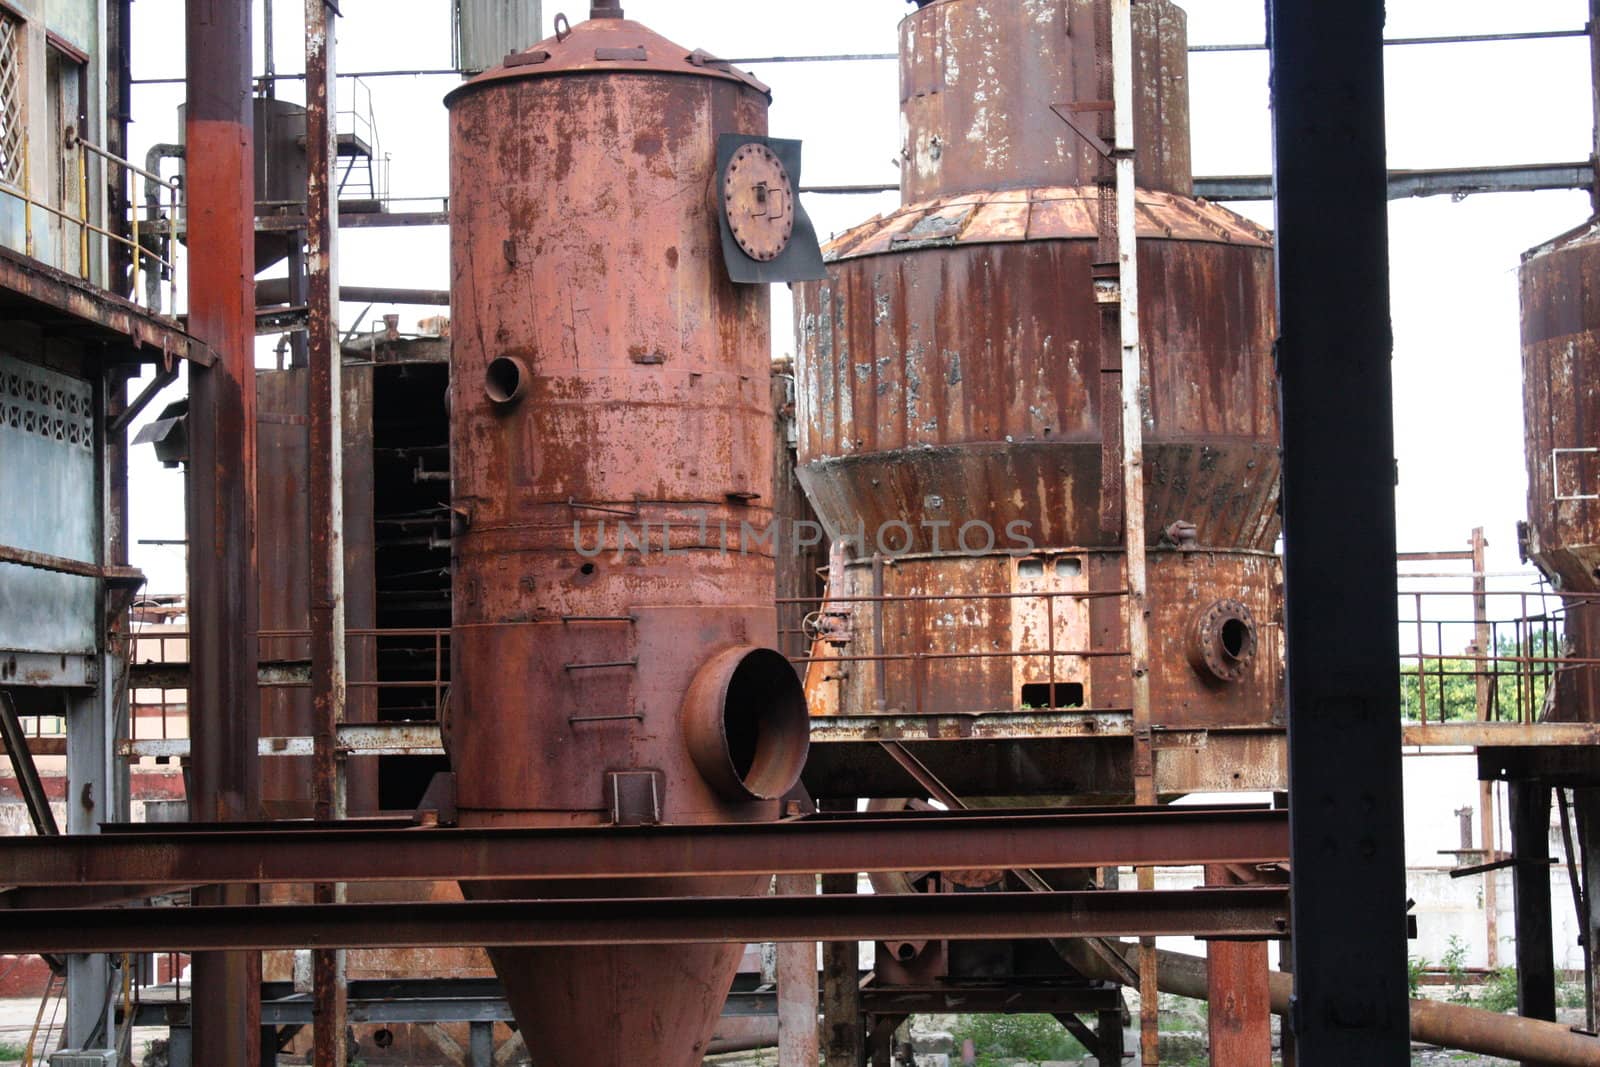 Rusty industrial tanks or vats in an abandoned factory.